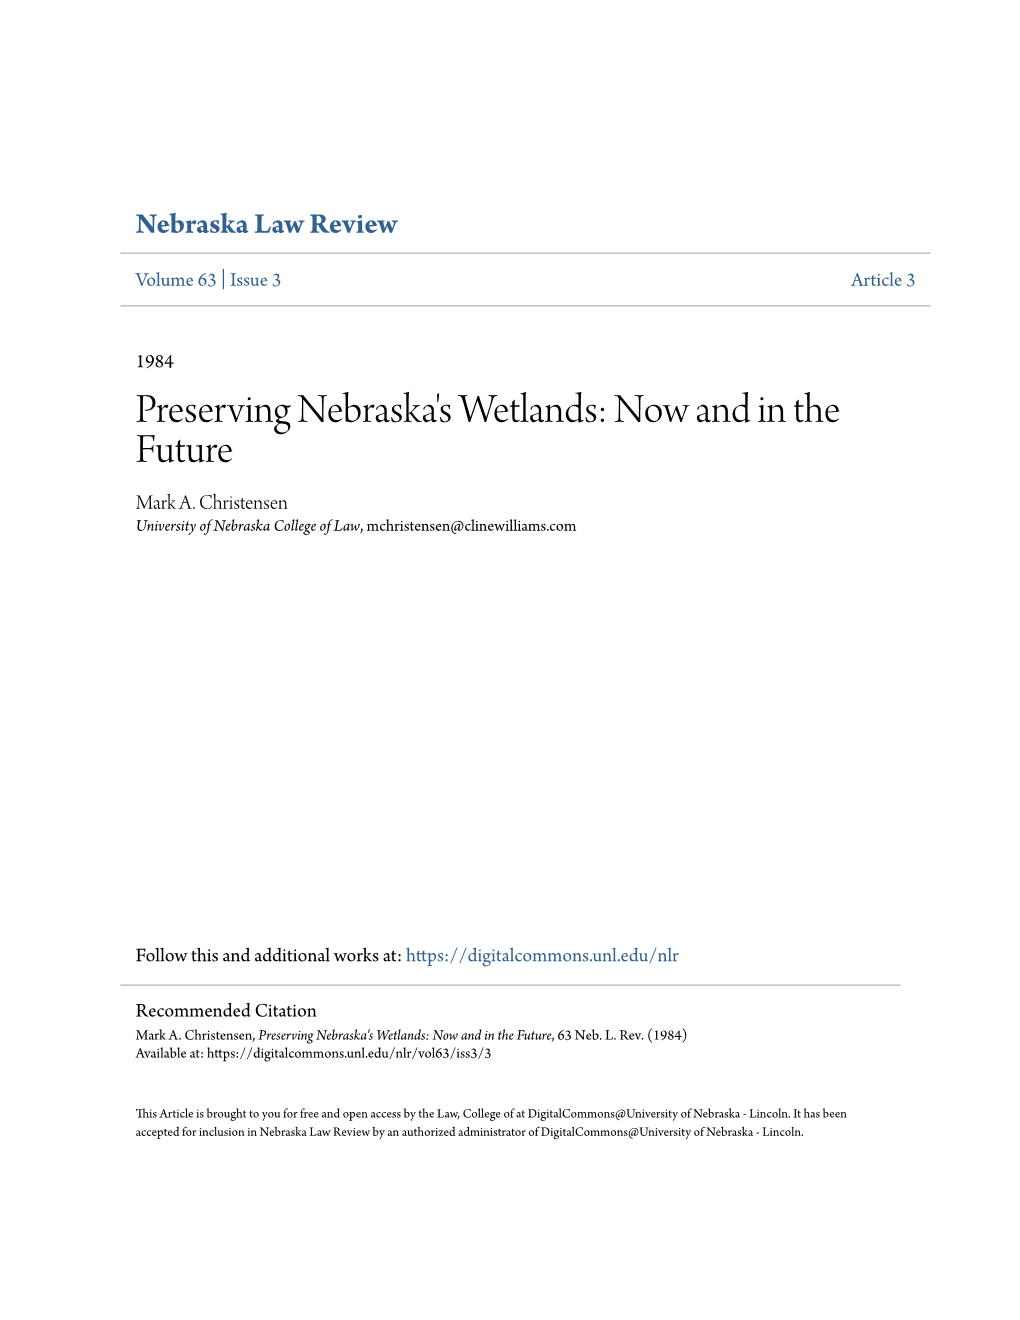 Preserving Nebraska's Wetlands: Now and in the Future Mark A